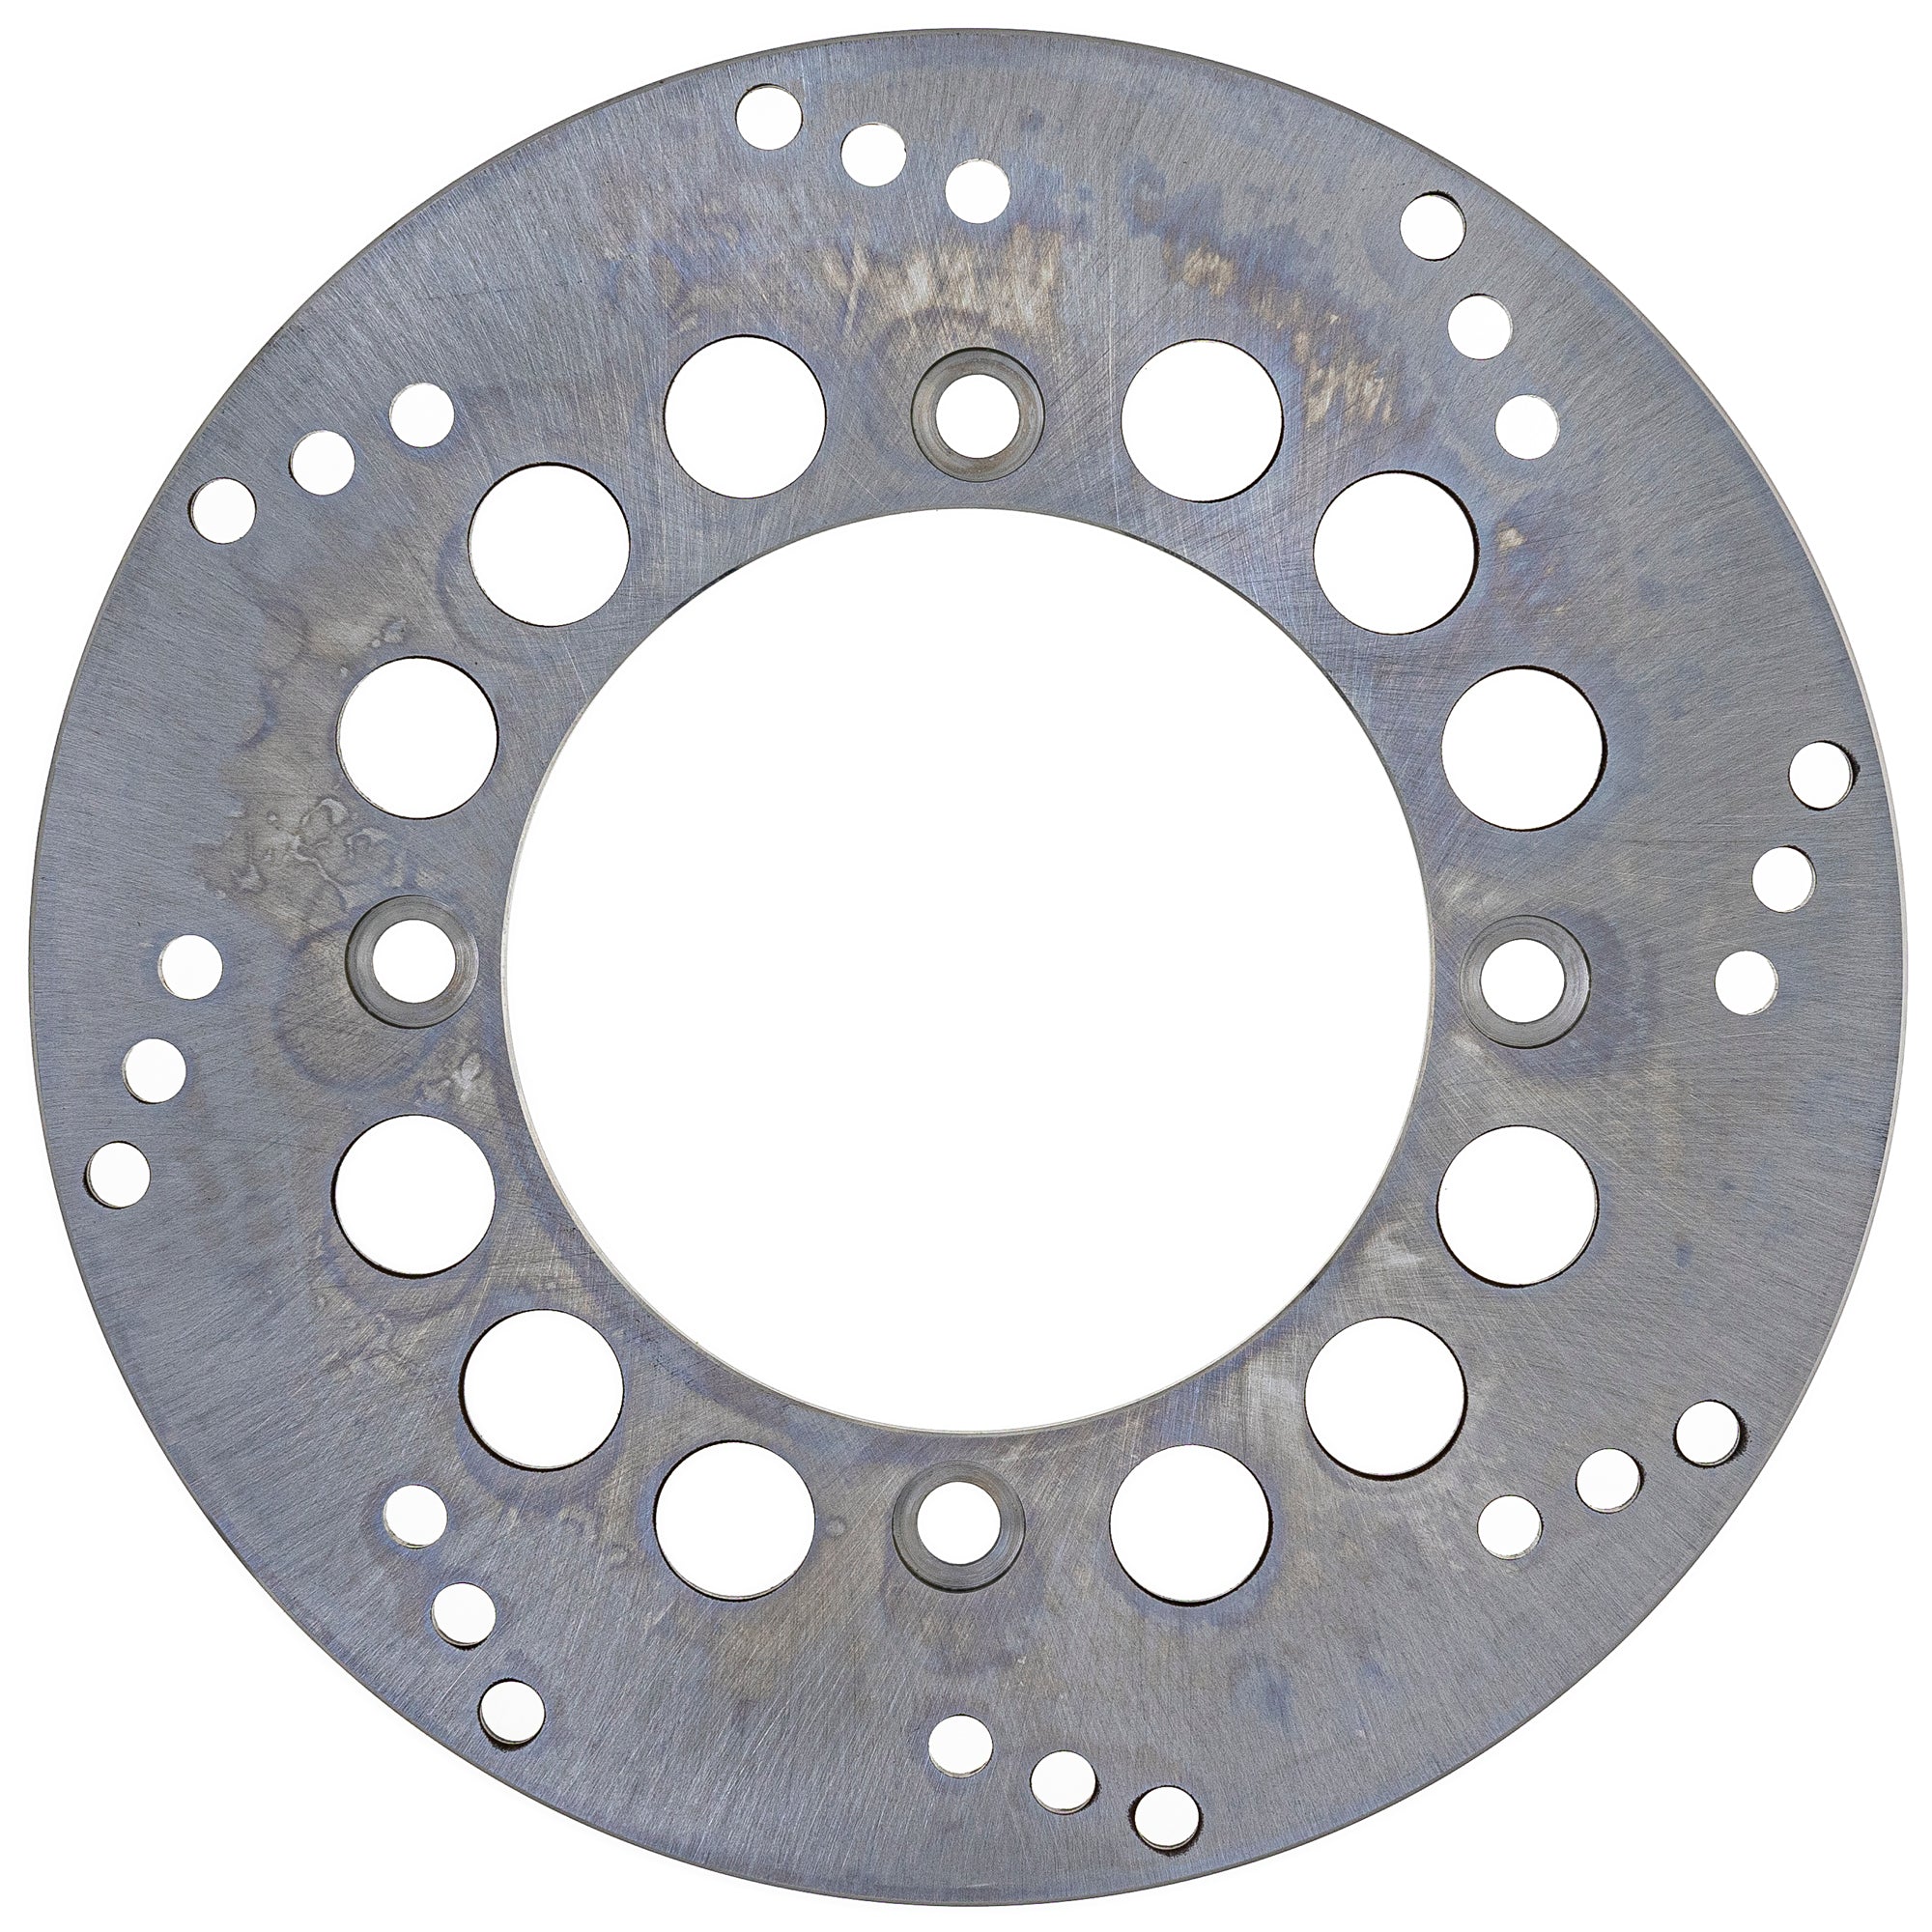 Rear Brake Rotor for zOTHER DR650SE NICHE 519-CRT2492R